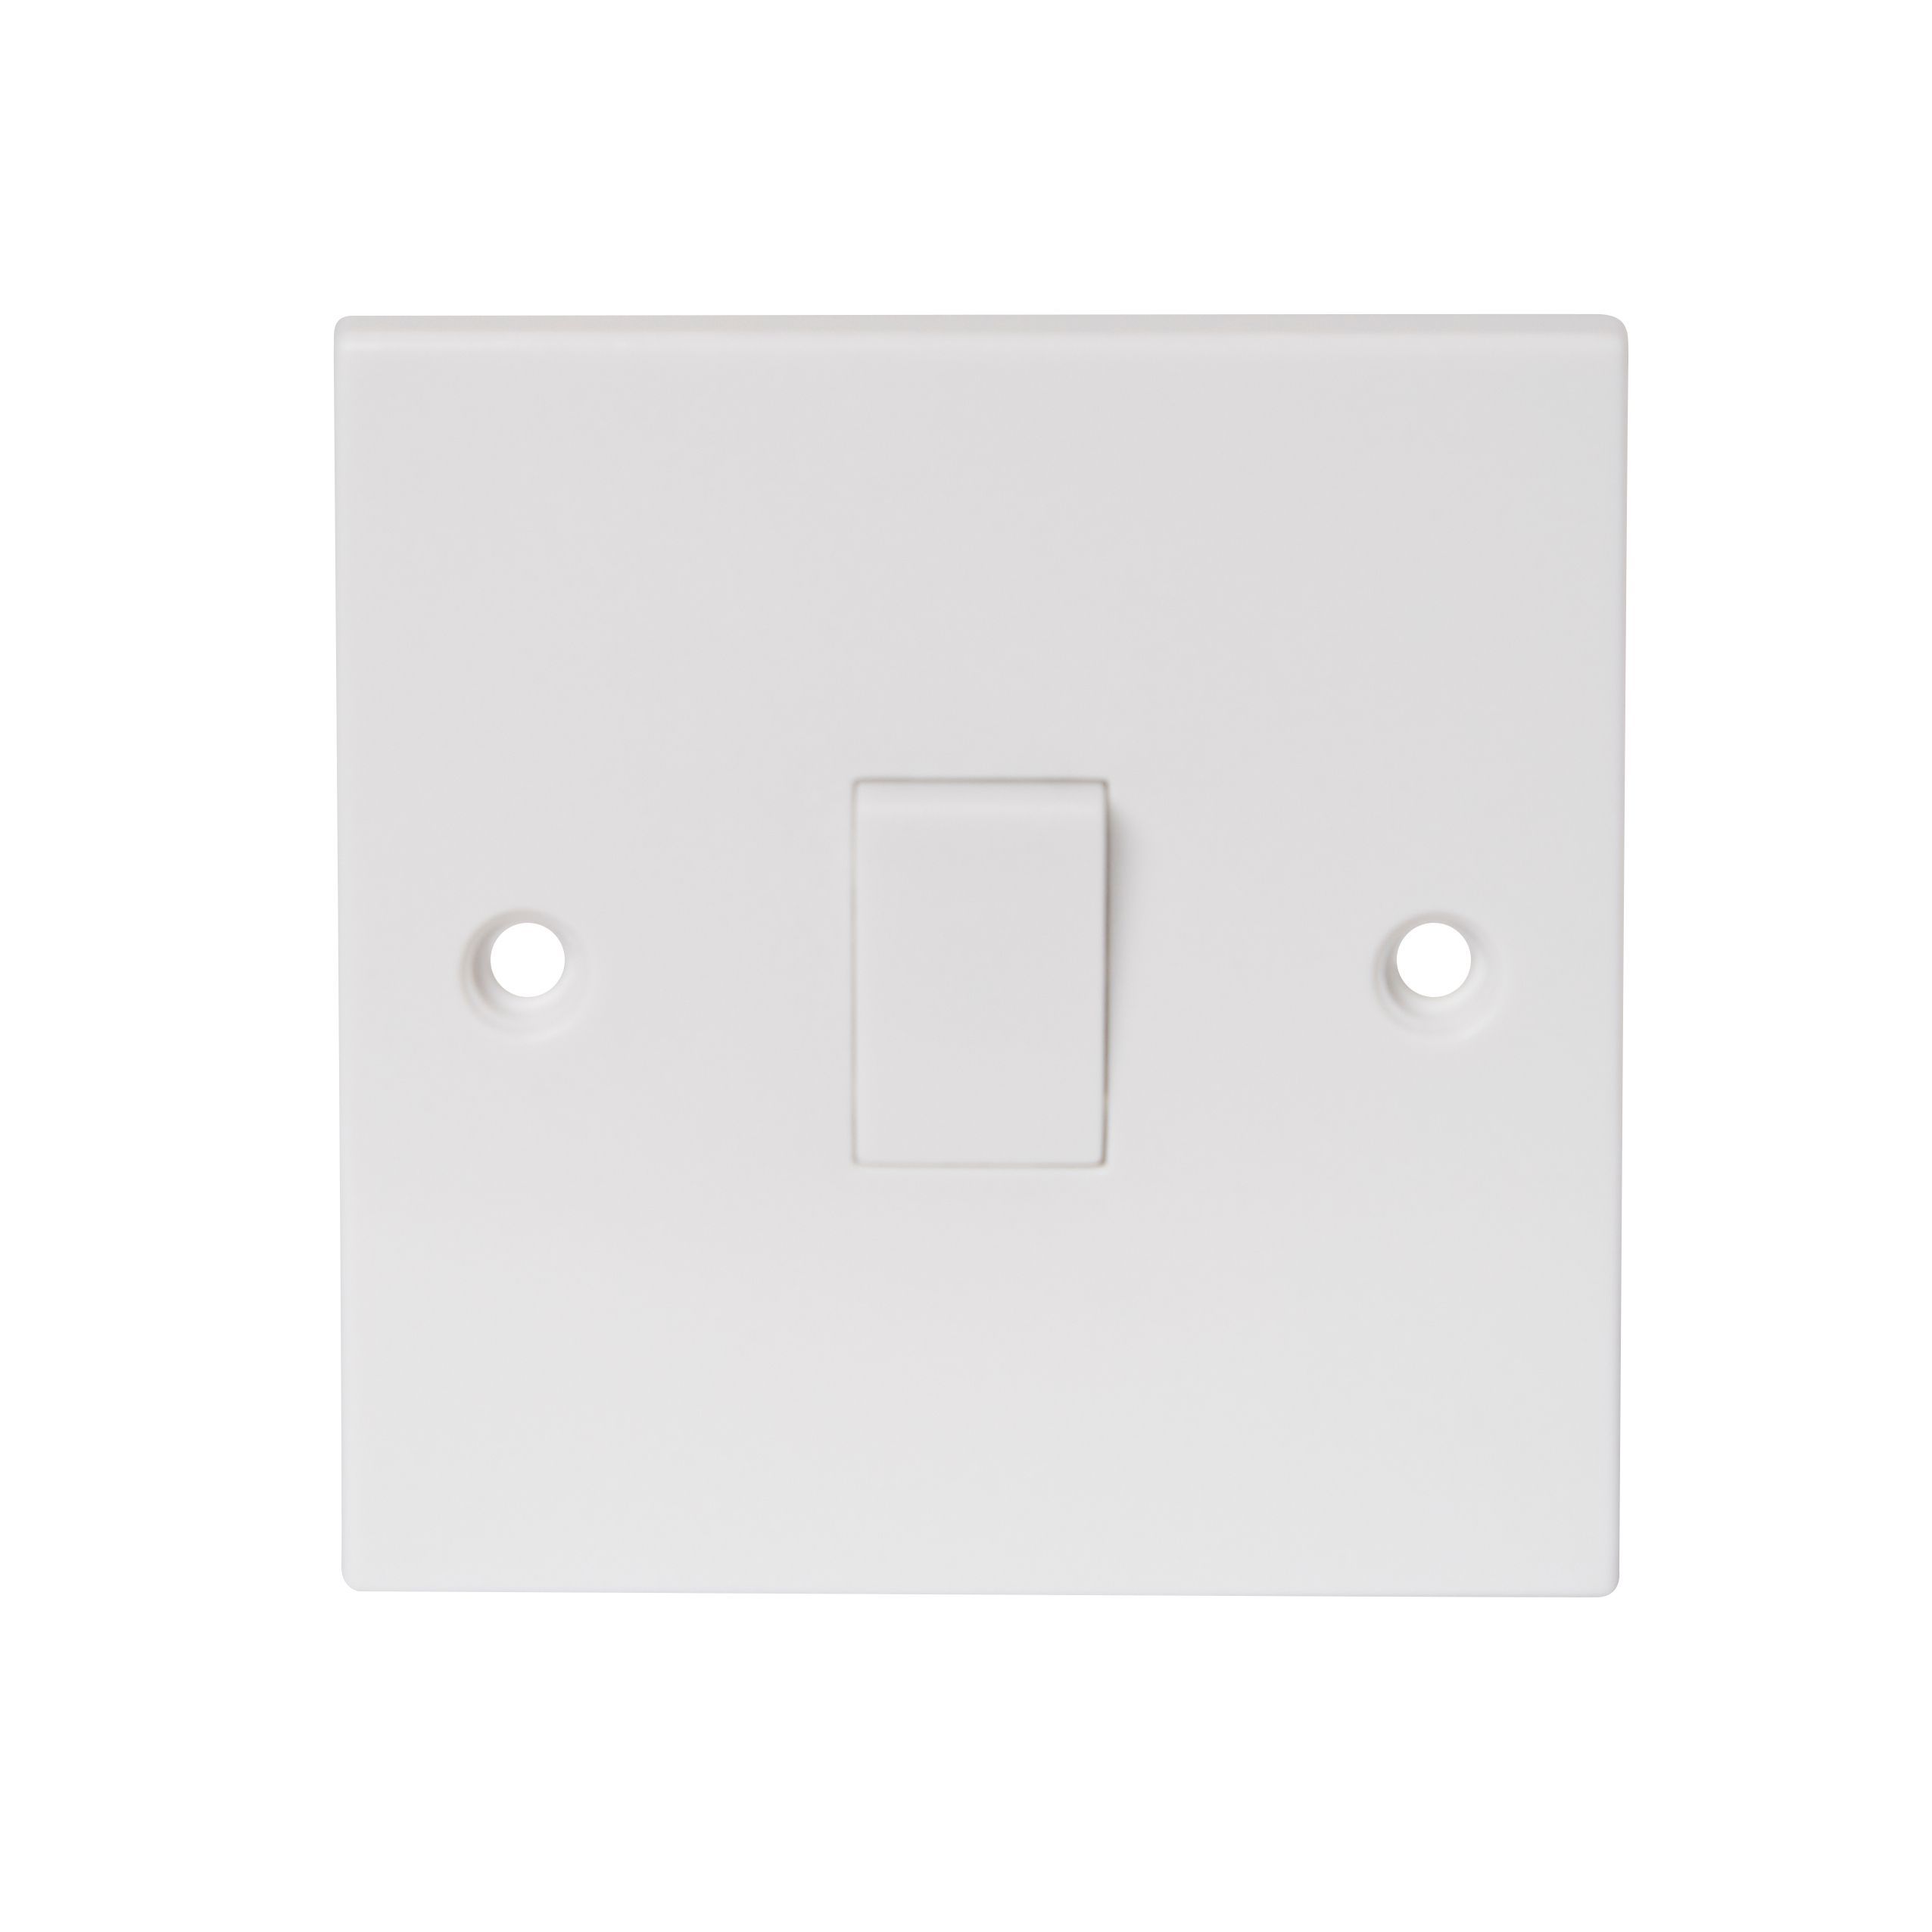 Power Pro 13A 1 way White Single Light Switch, Pack of 5